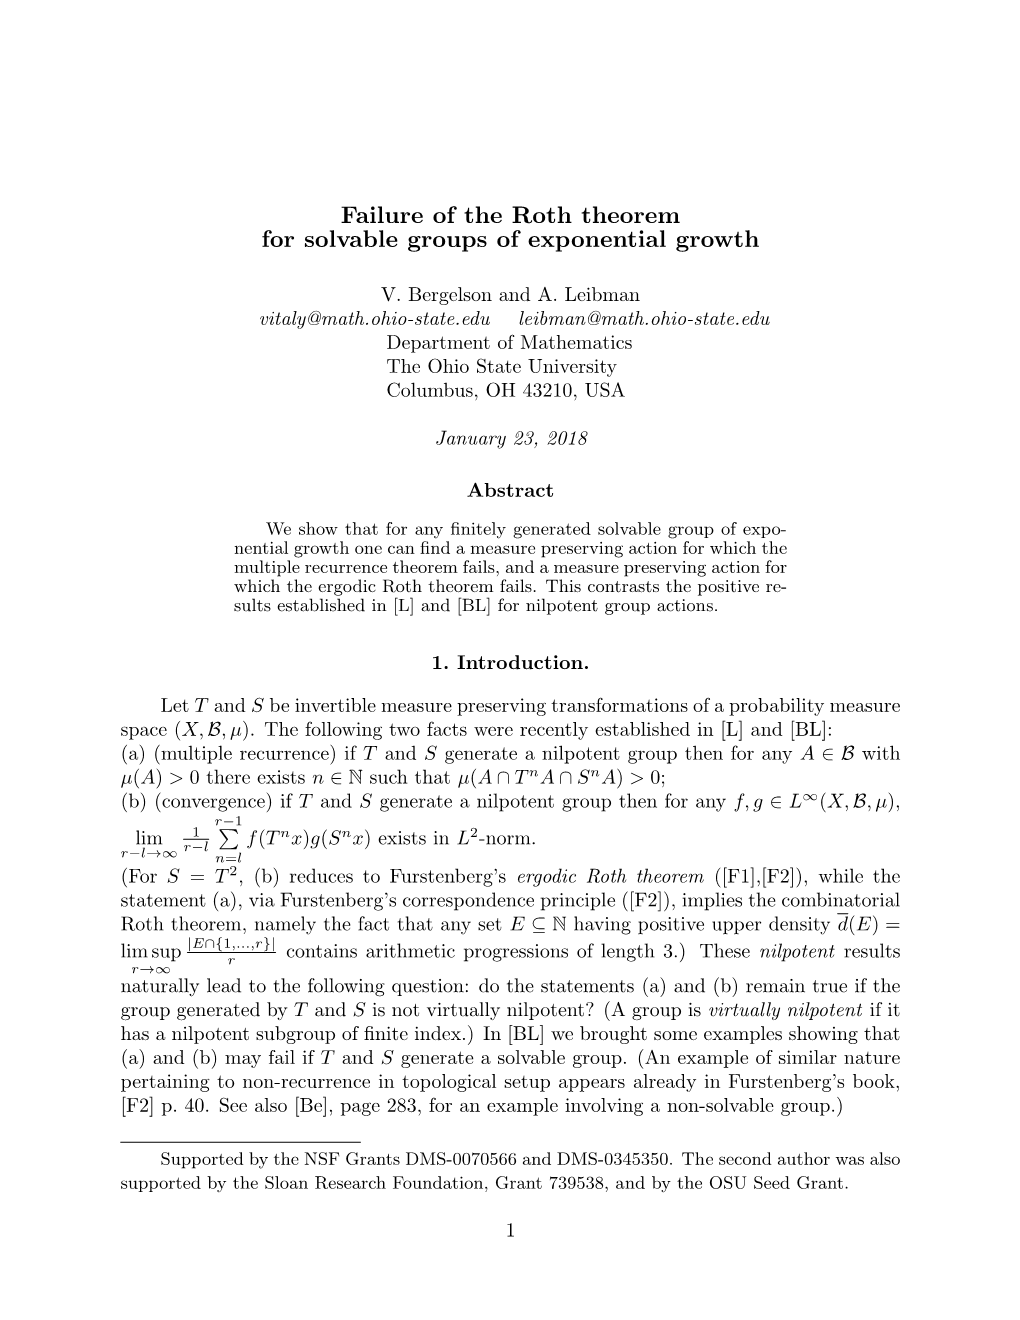 Failure of the Roth Theorem for Solvable Groups of Exponential Growth